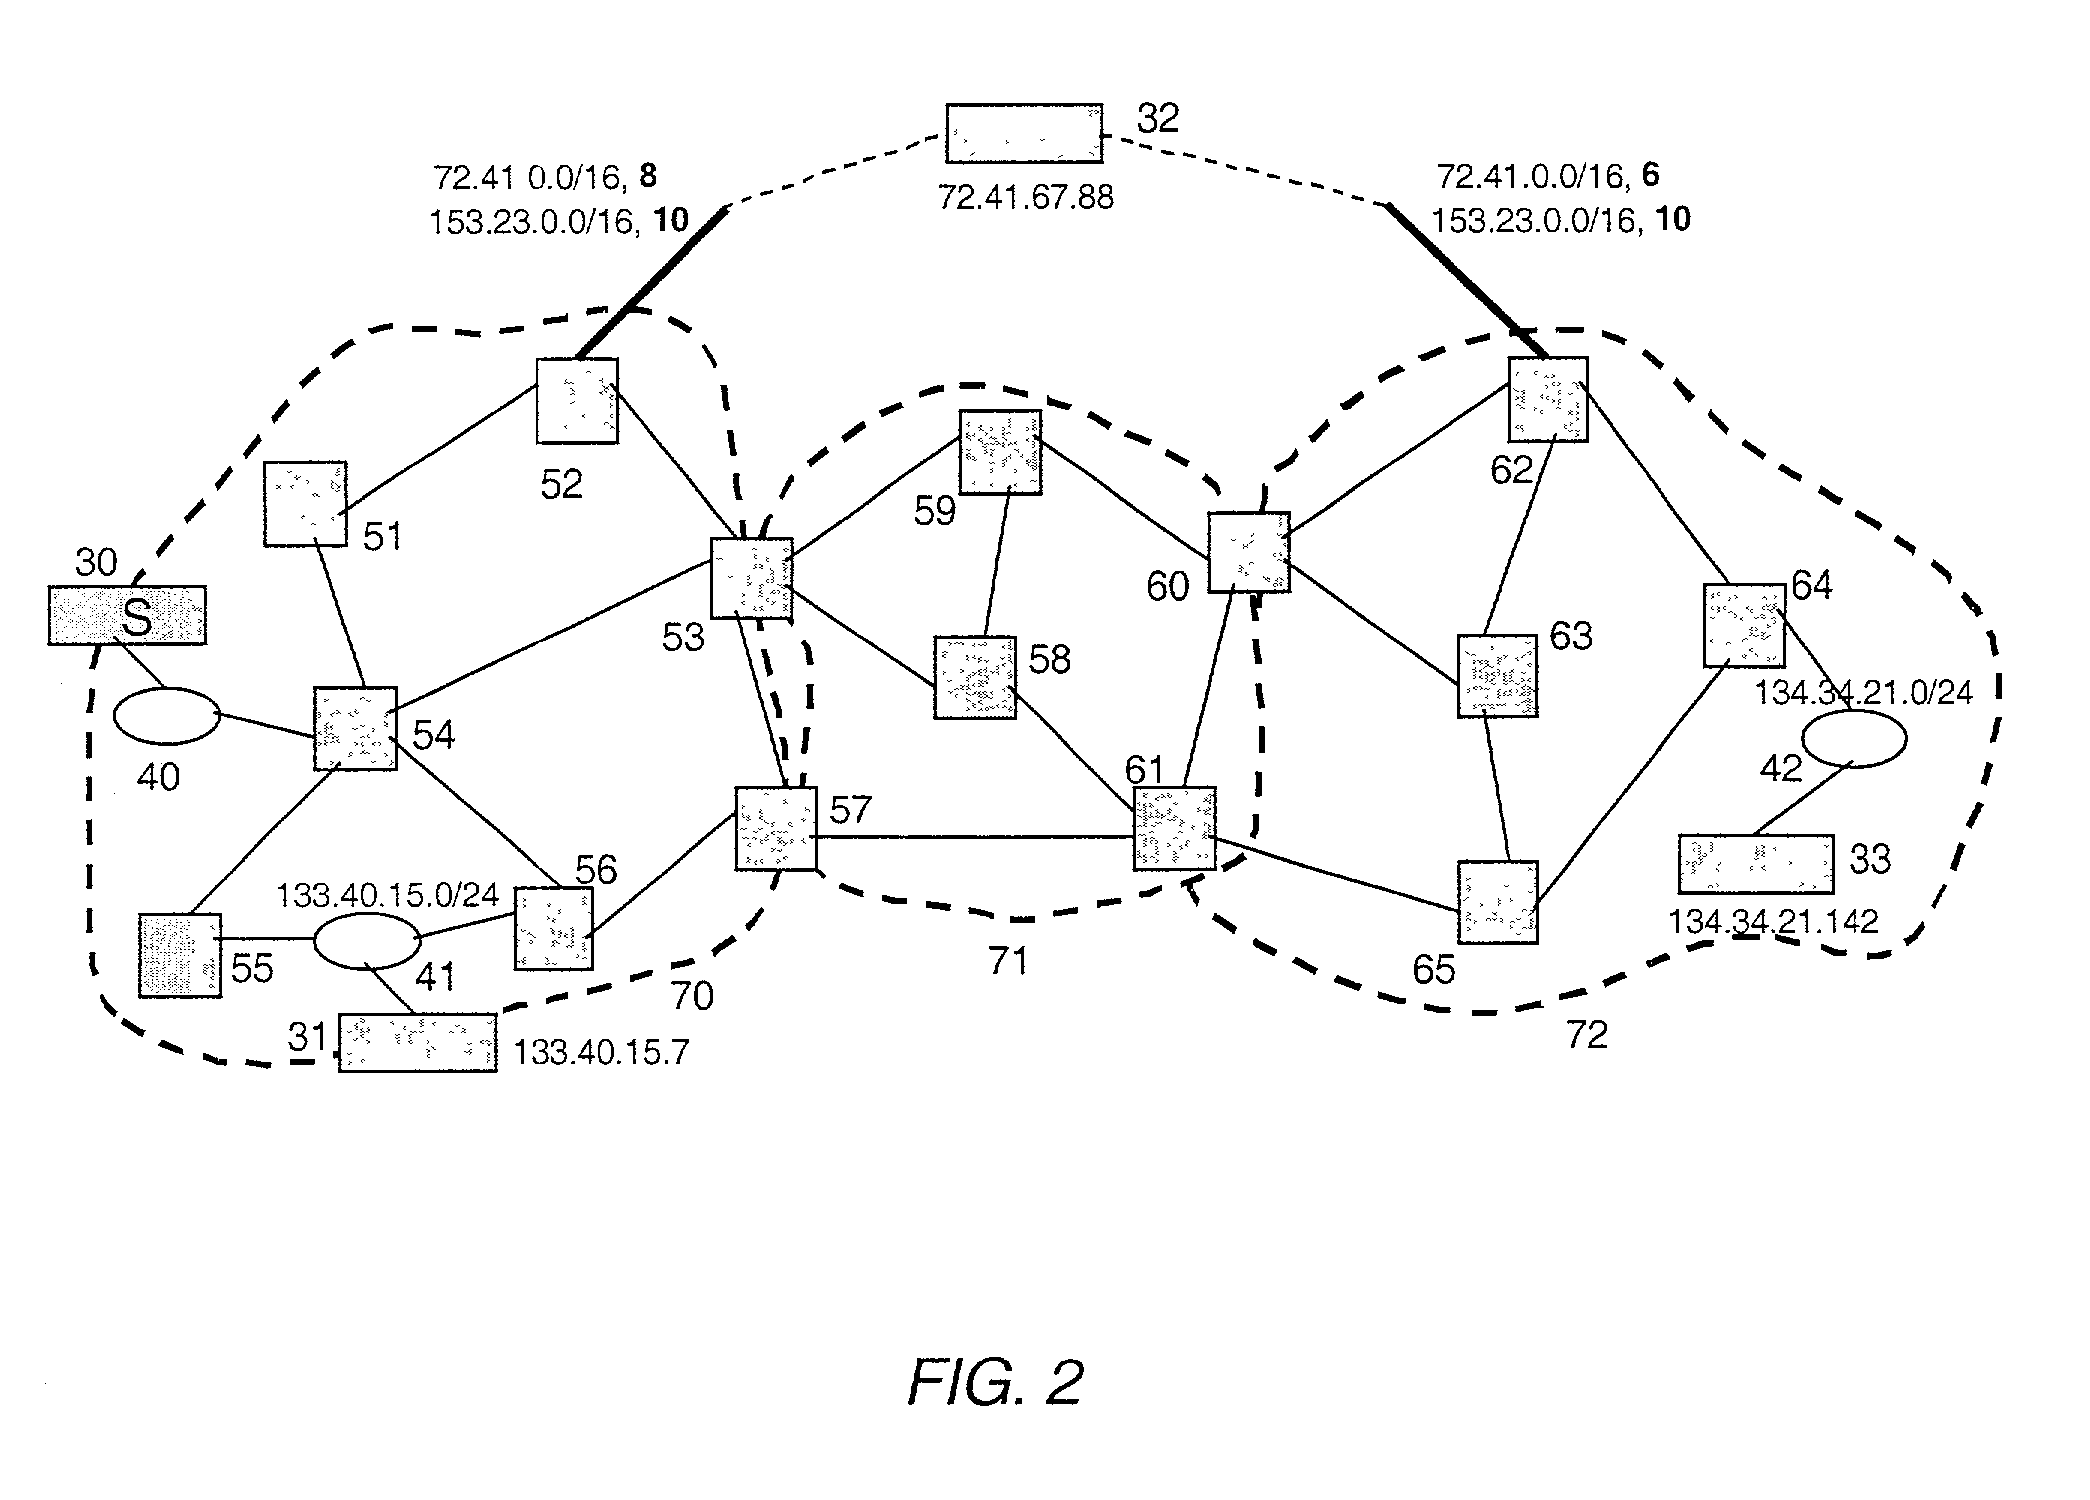 Method and system for topology construction and path identification in a routing domain operated according to a link state routing protocol